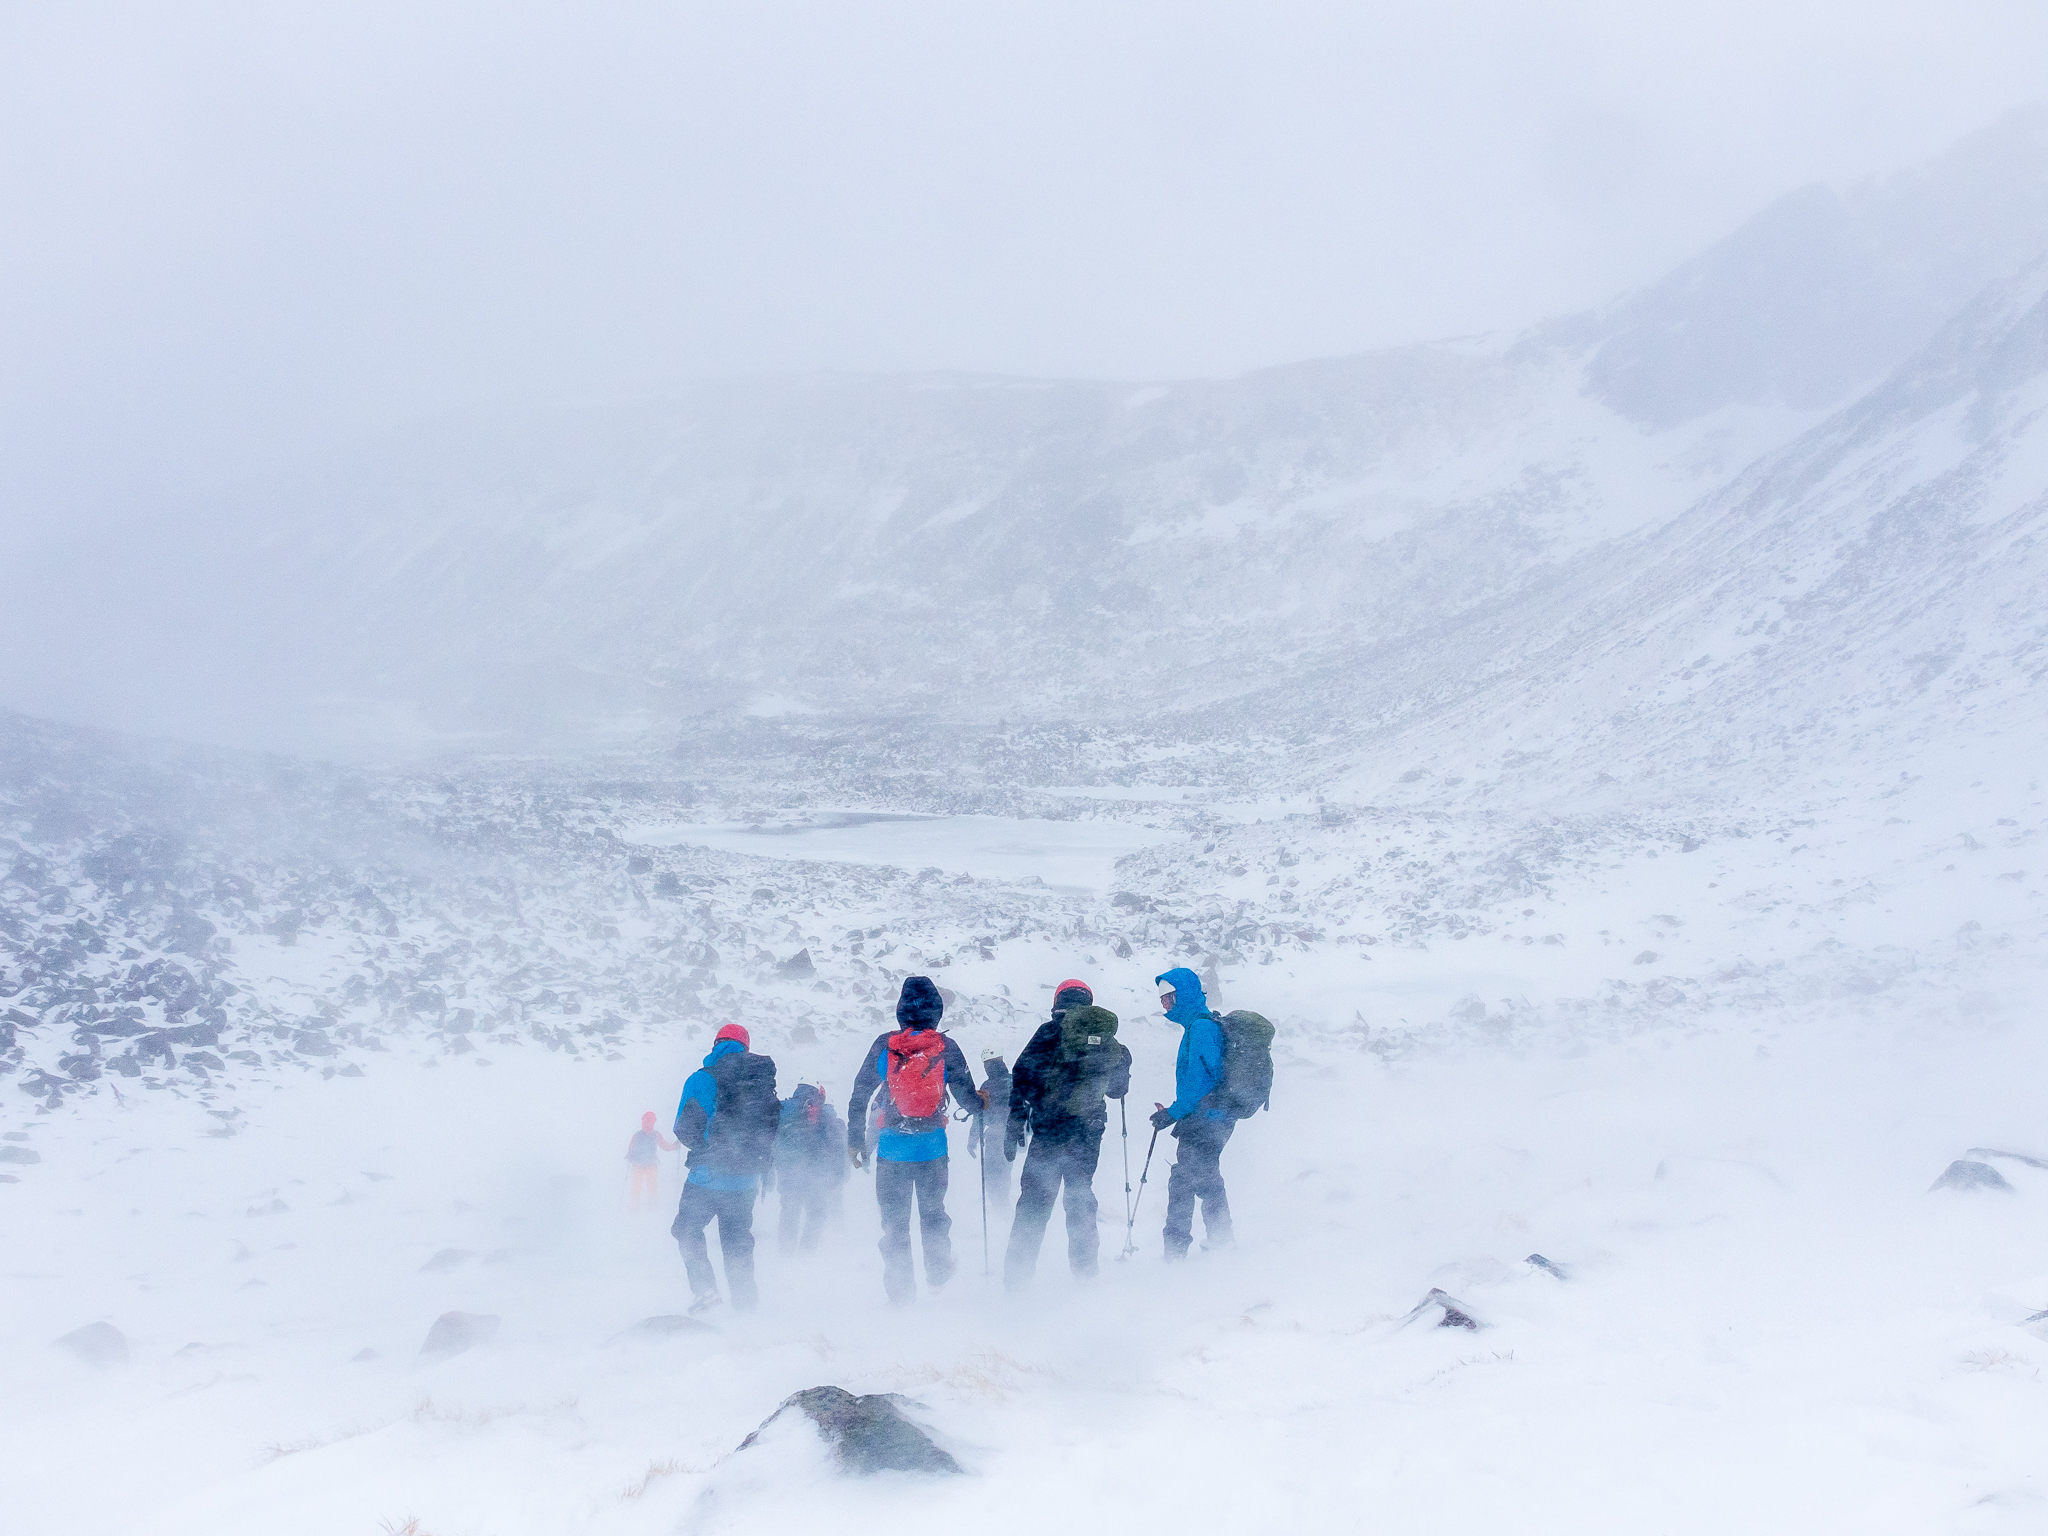  The team descends from cutting snow steps on the slopes of Corie an Sneachda during a blizzard. 